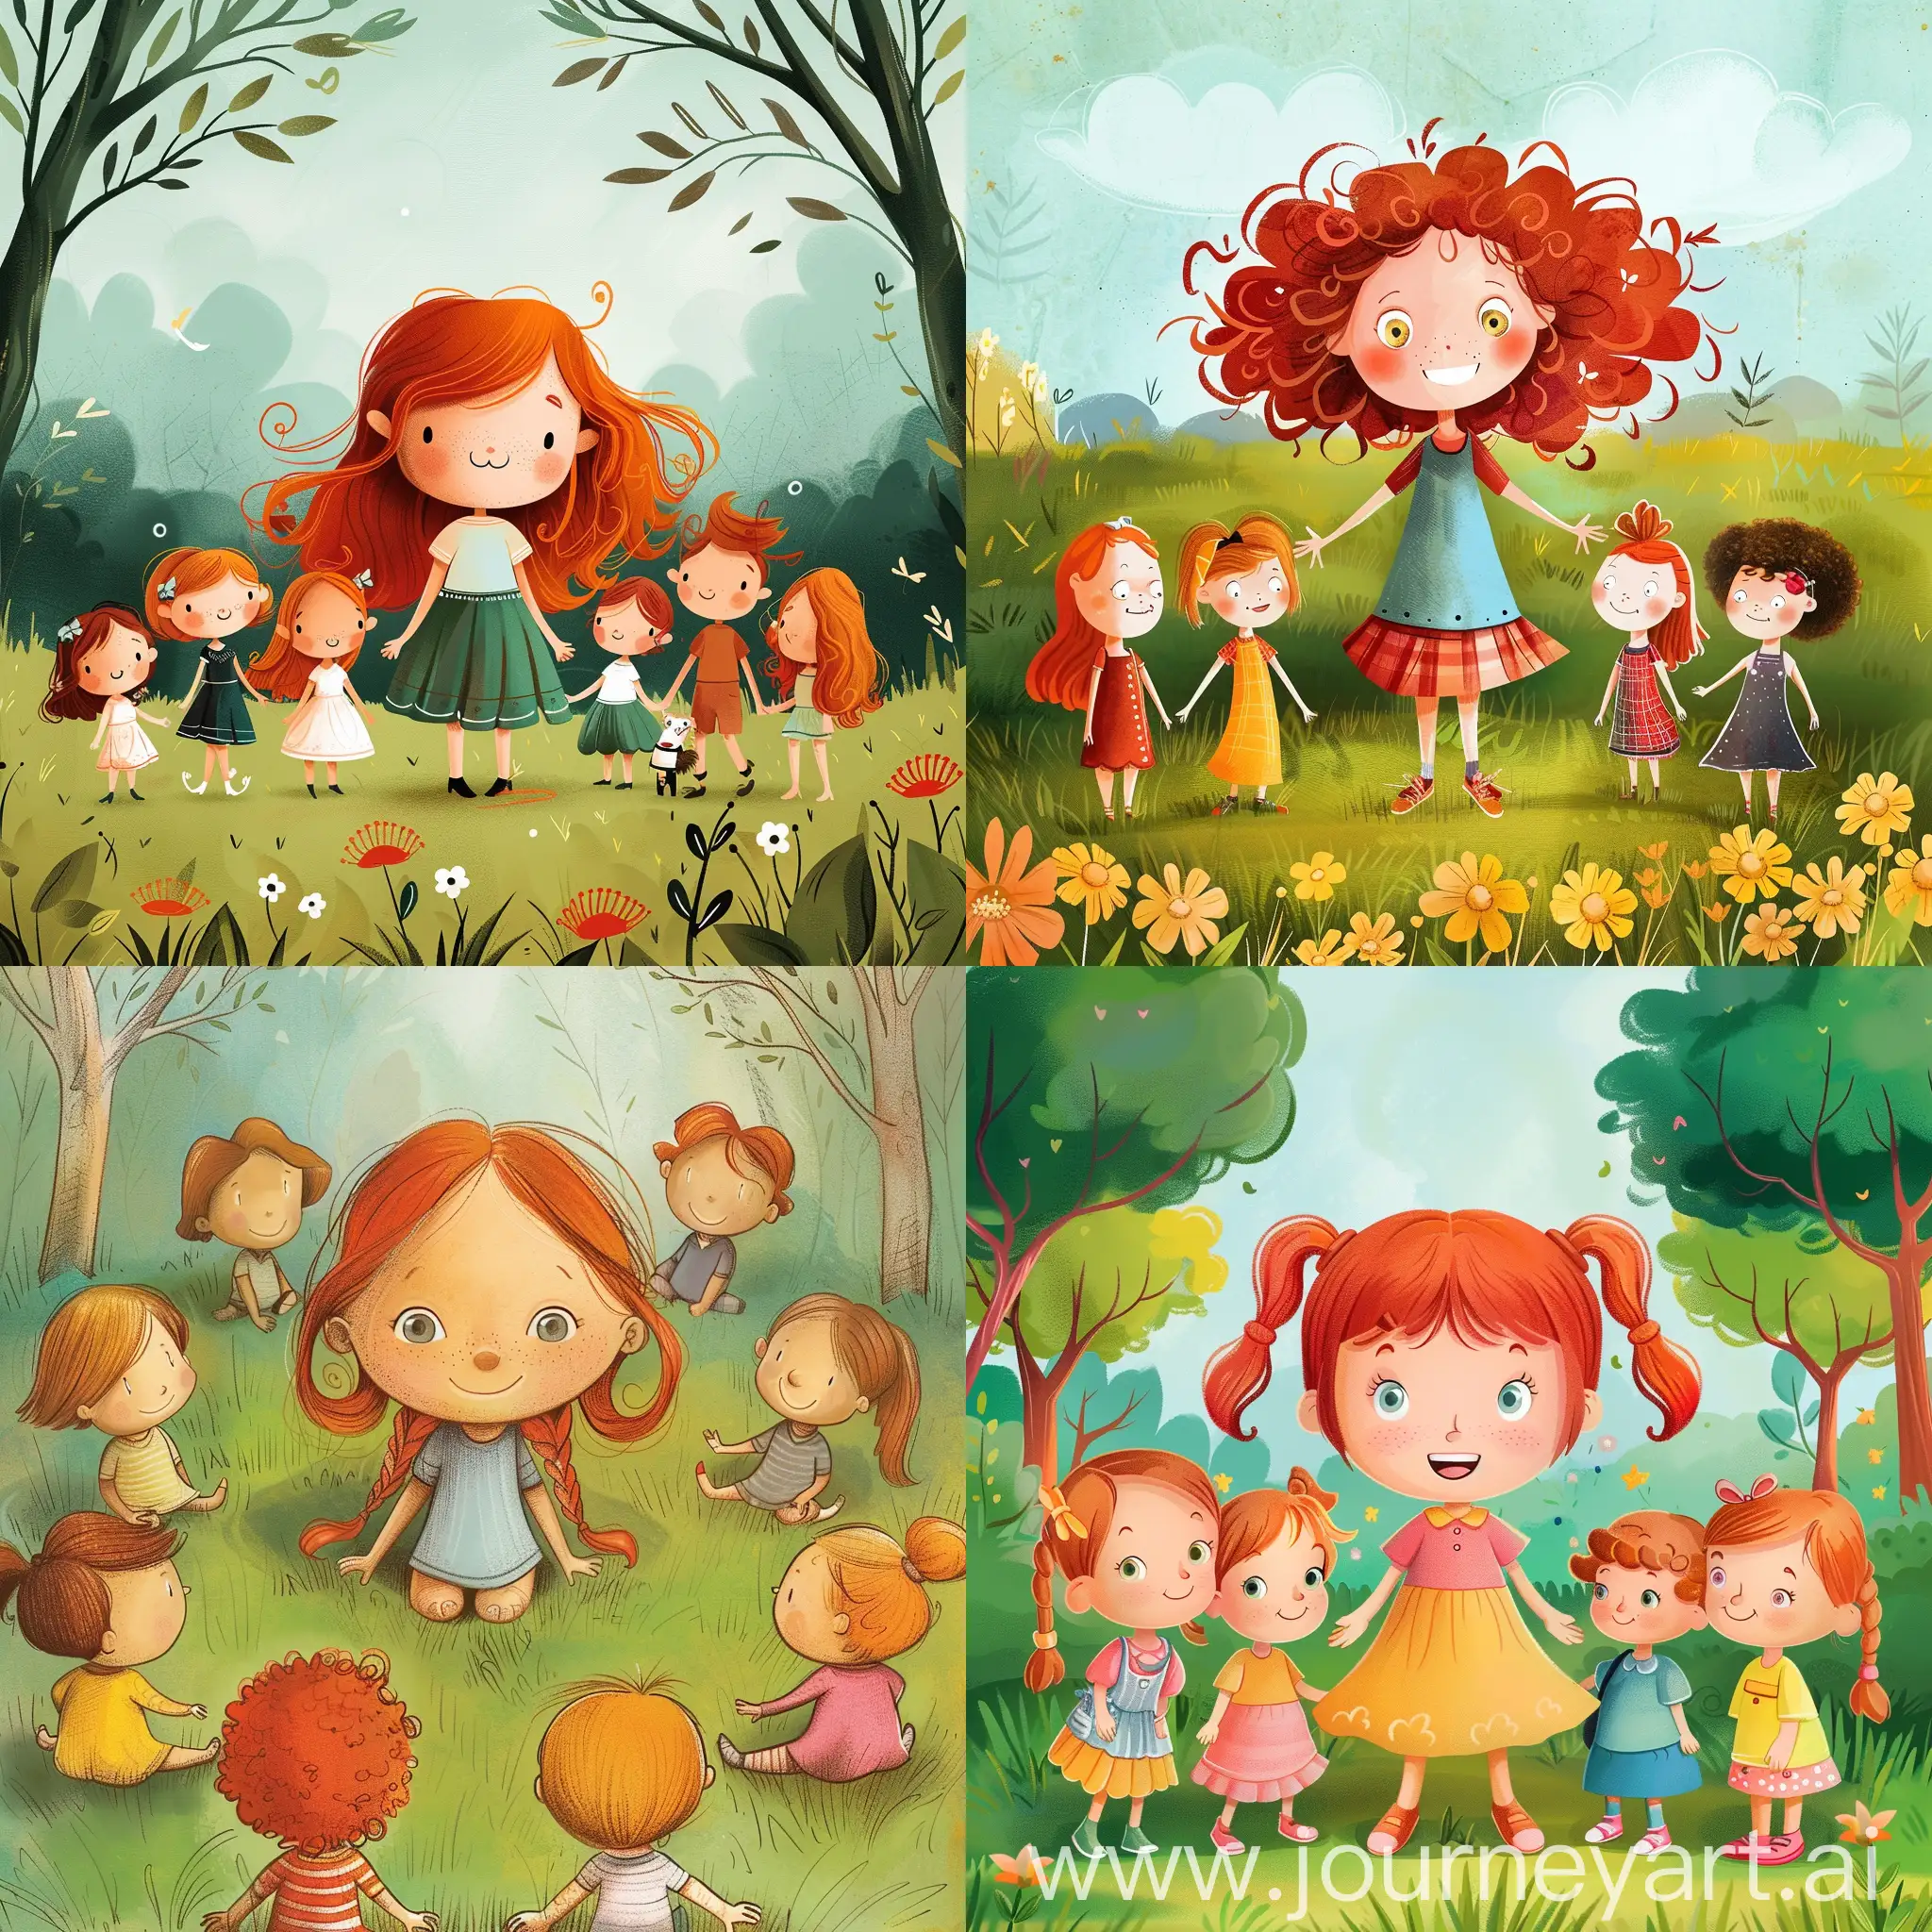 Little cartoon girl with red hair surrounded by her 6 friends in the park